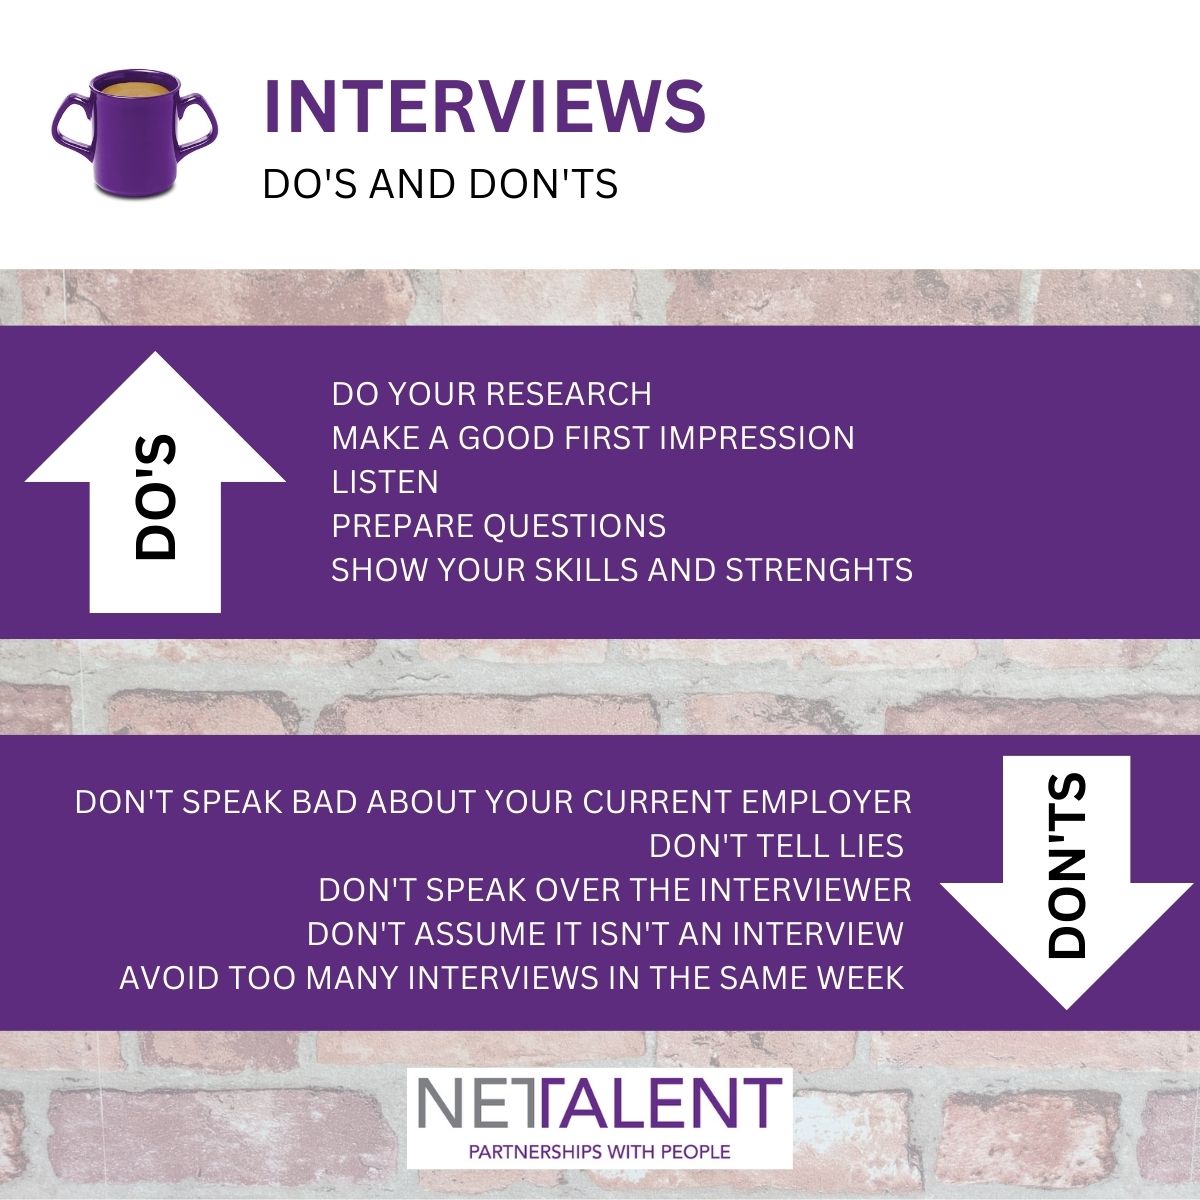 INTERVIEWS, DO’S AND DON’TS